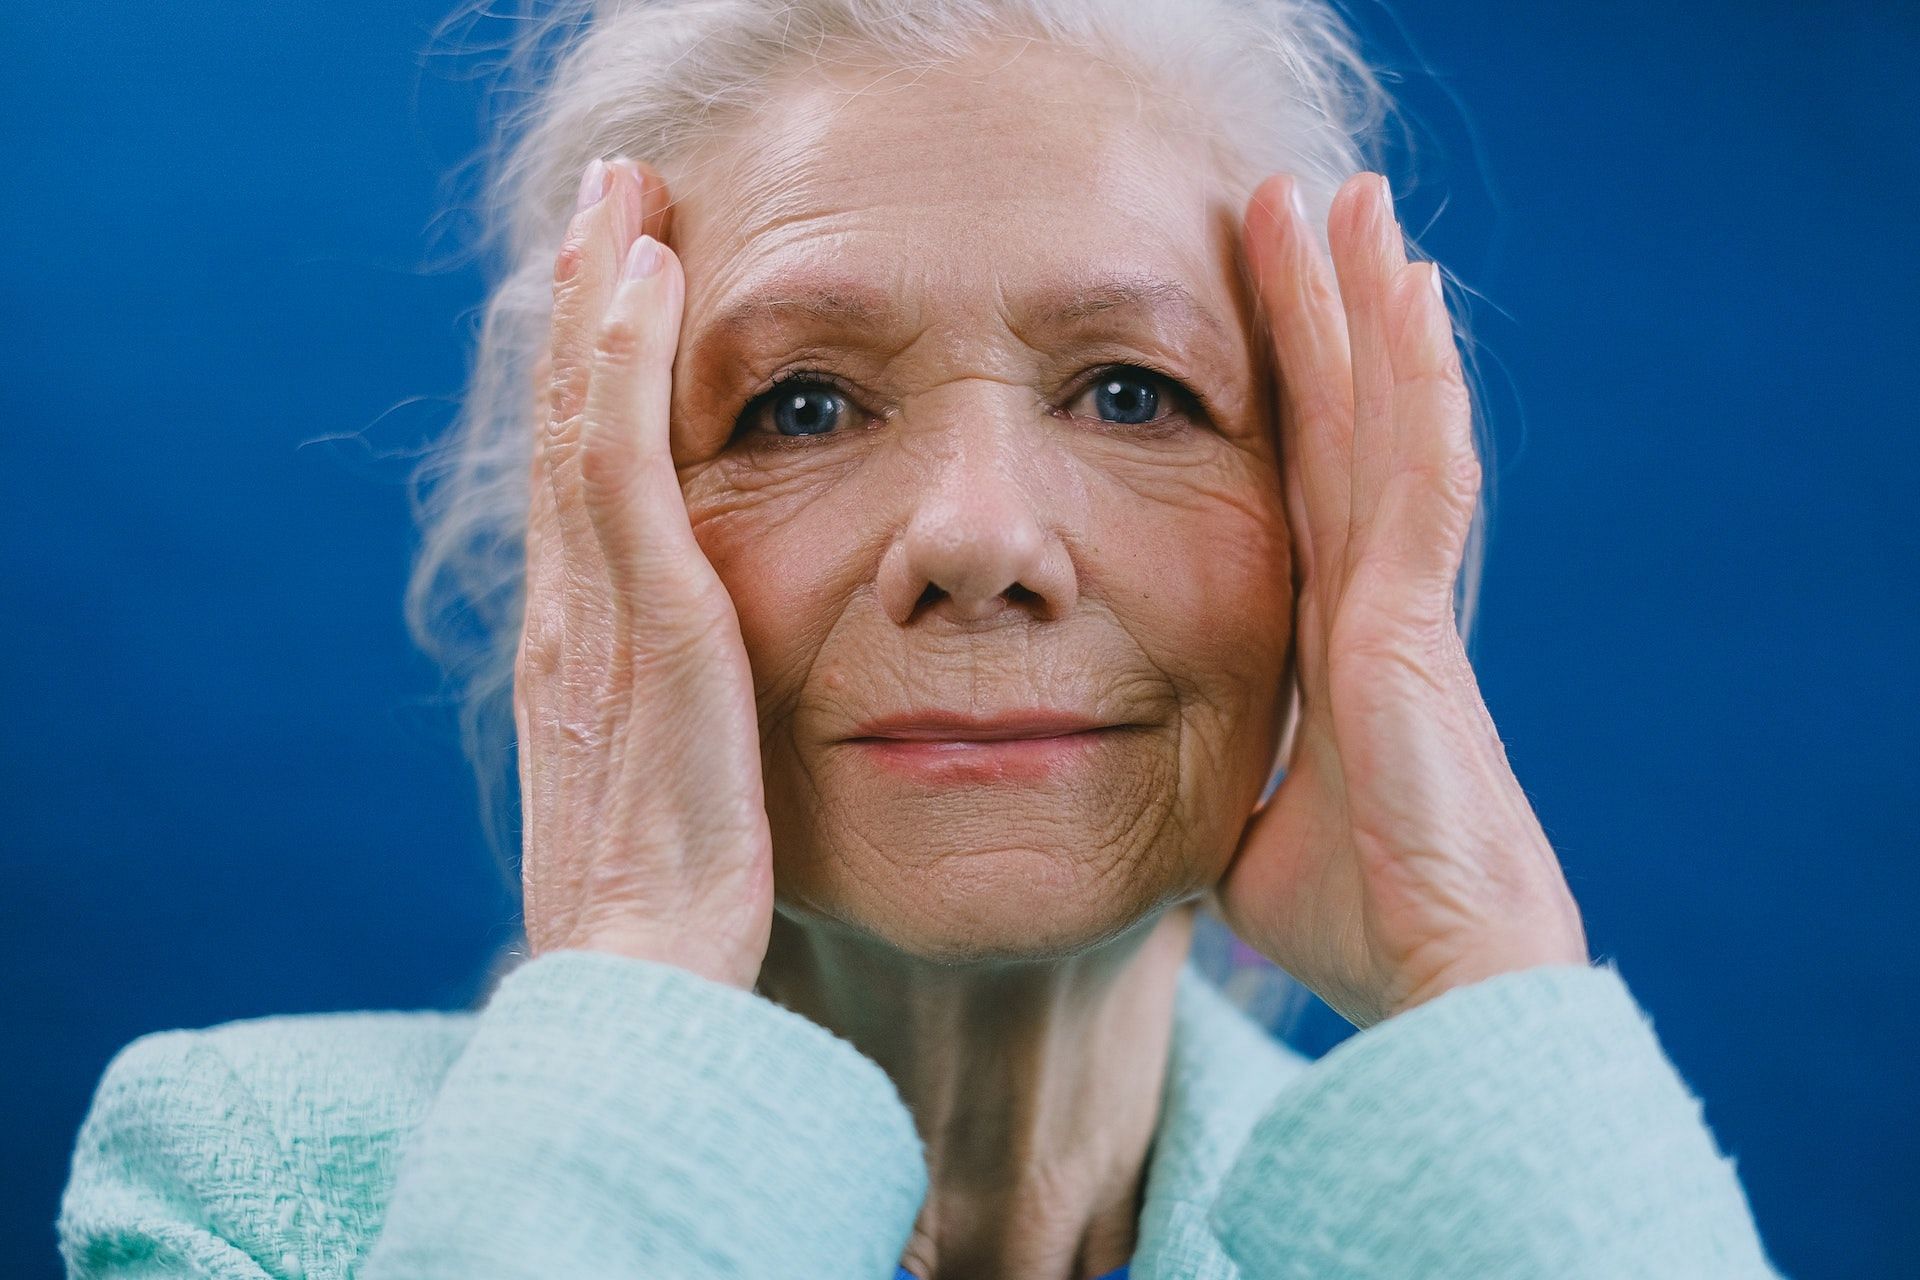 Aging can cause dry eyes. (Image via Pexels/SHVETS production)